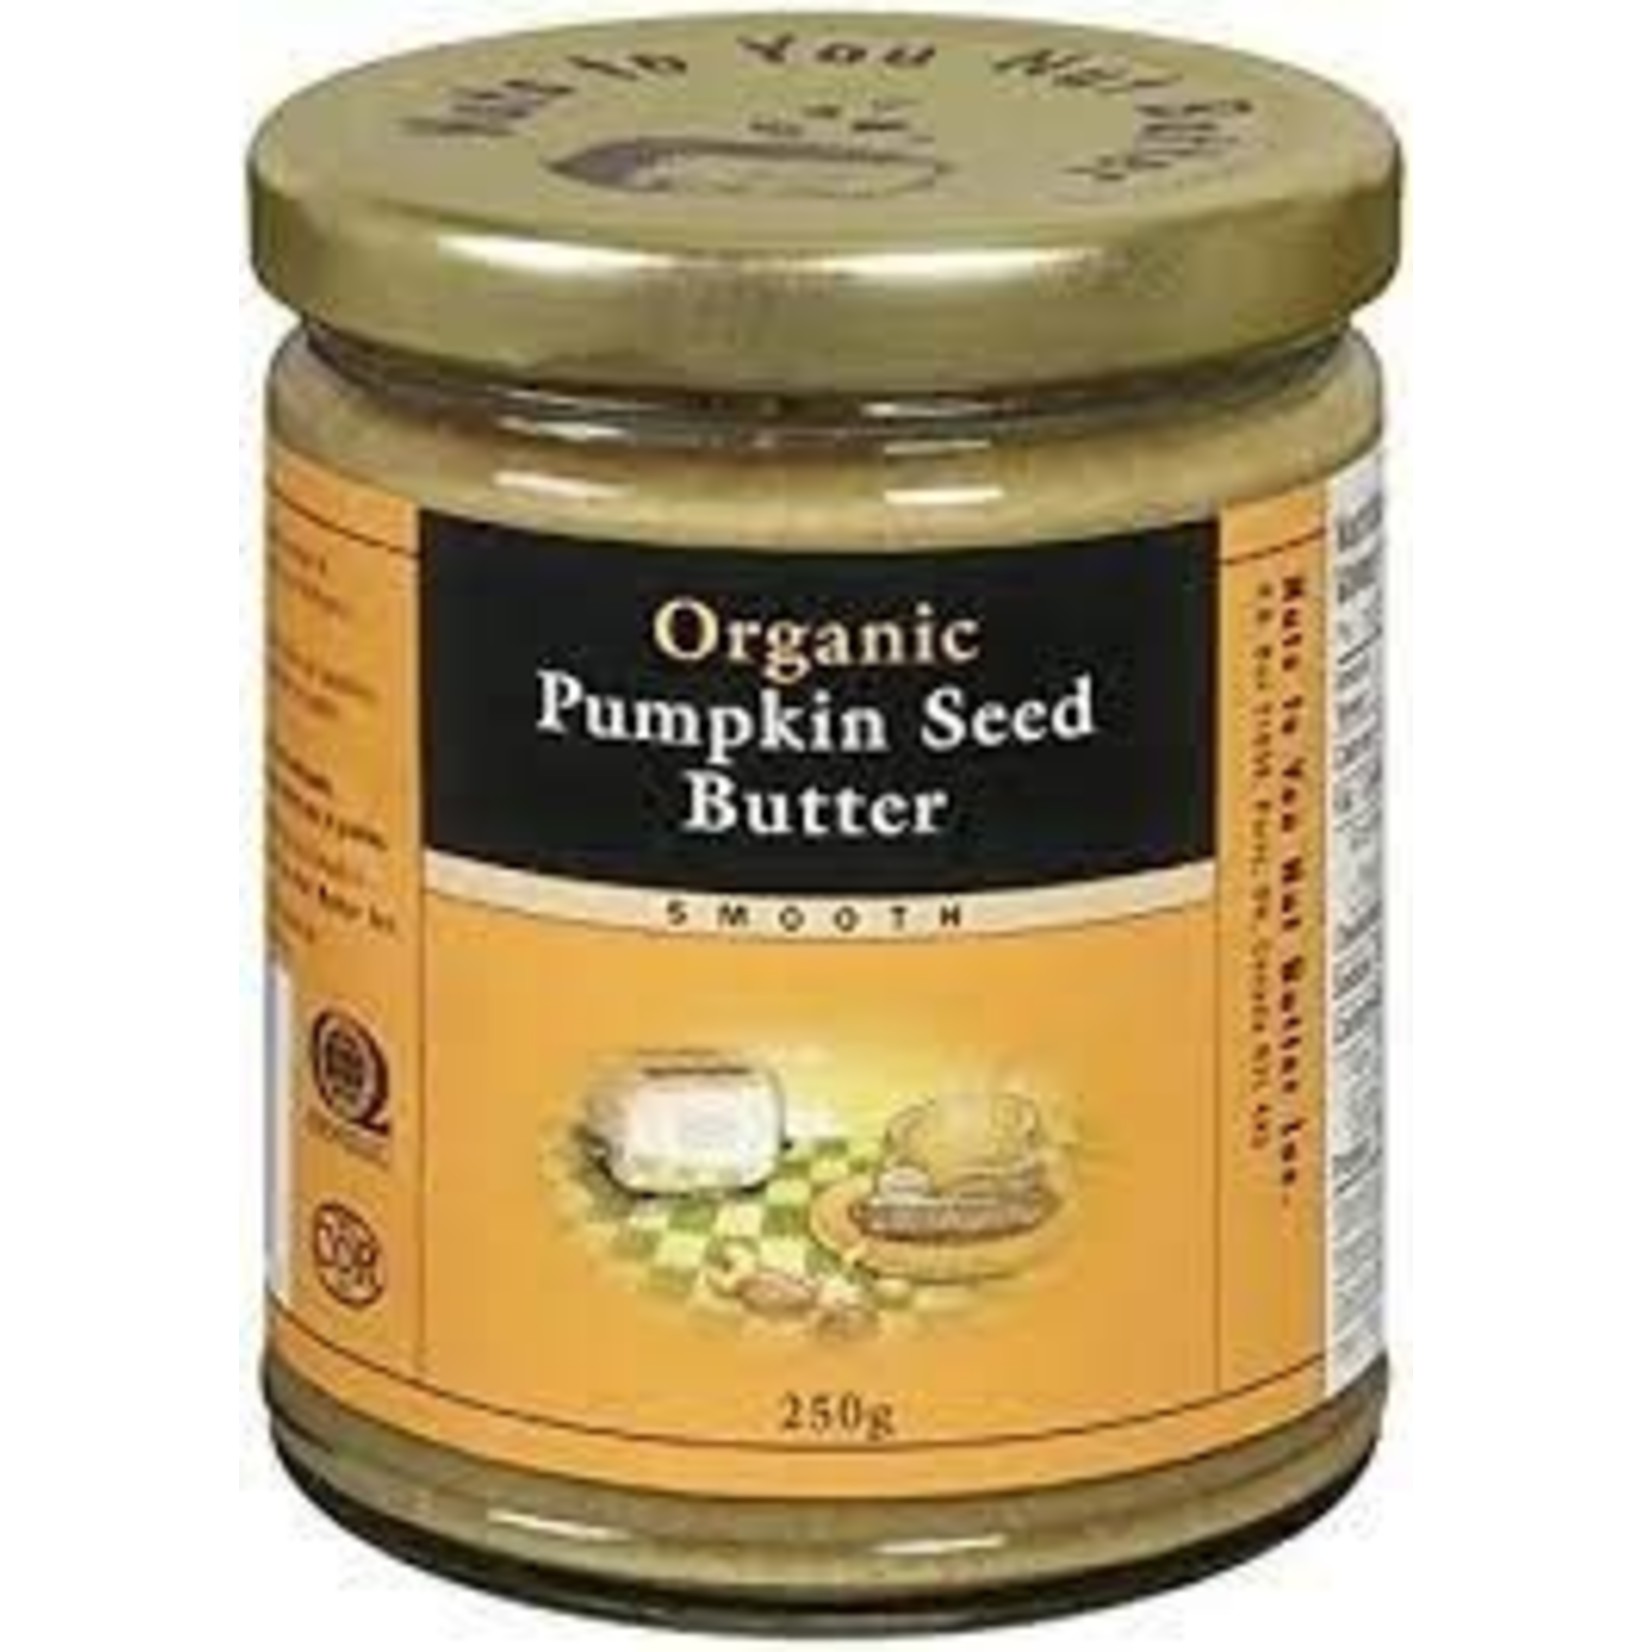 NUTS TO YOU NUTS TO YOU ORG PUMPKIN SEED BUTTER 250G